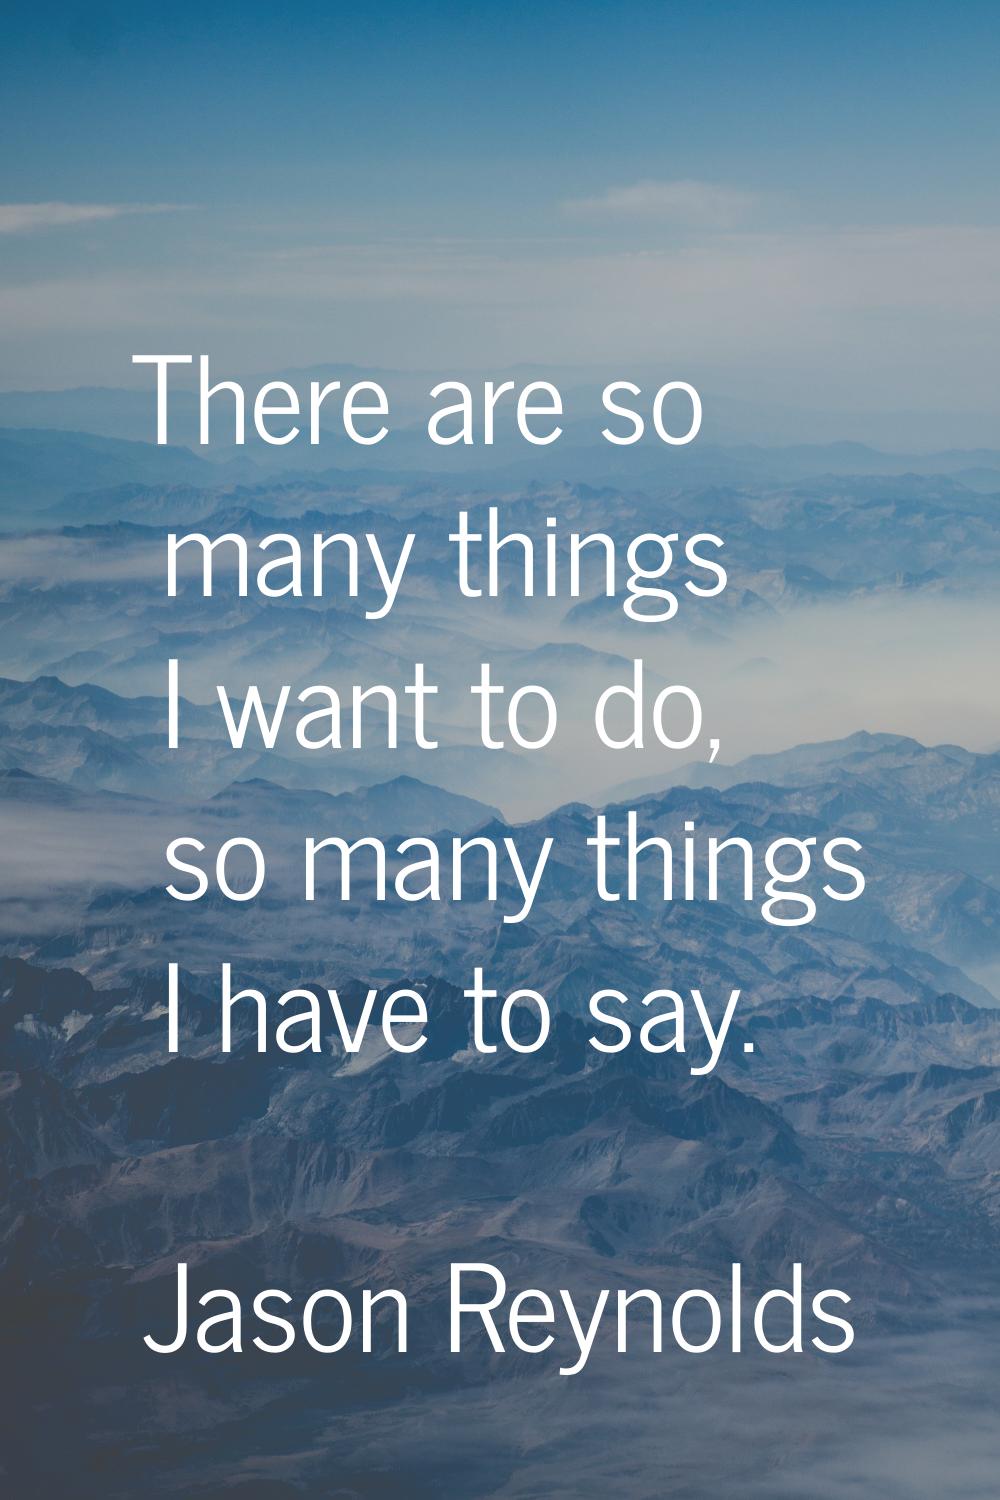 There are so many things I want to do, so many things I have to say.